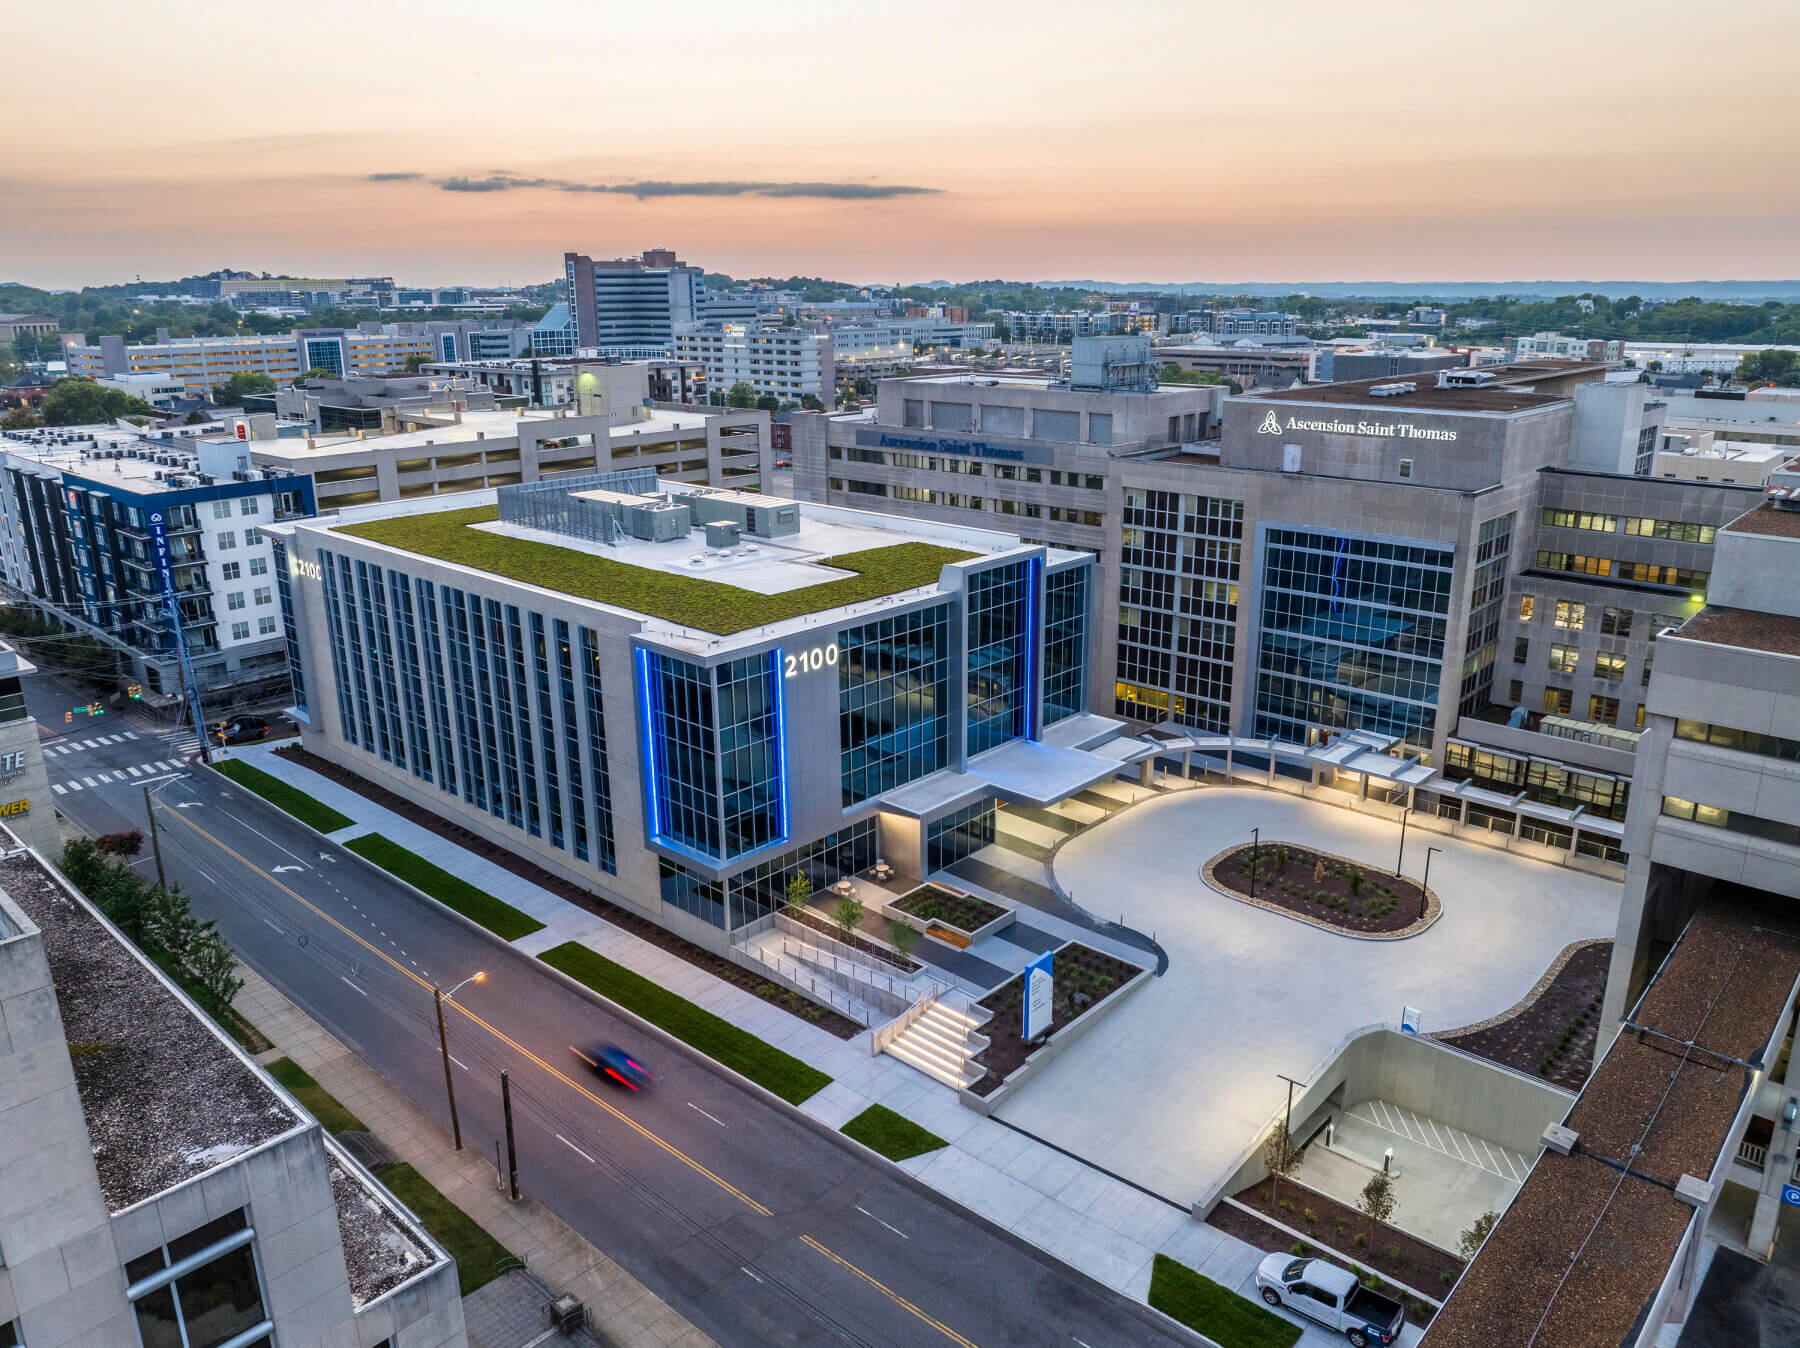 aerial view of exterior of medical office building at dusk